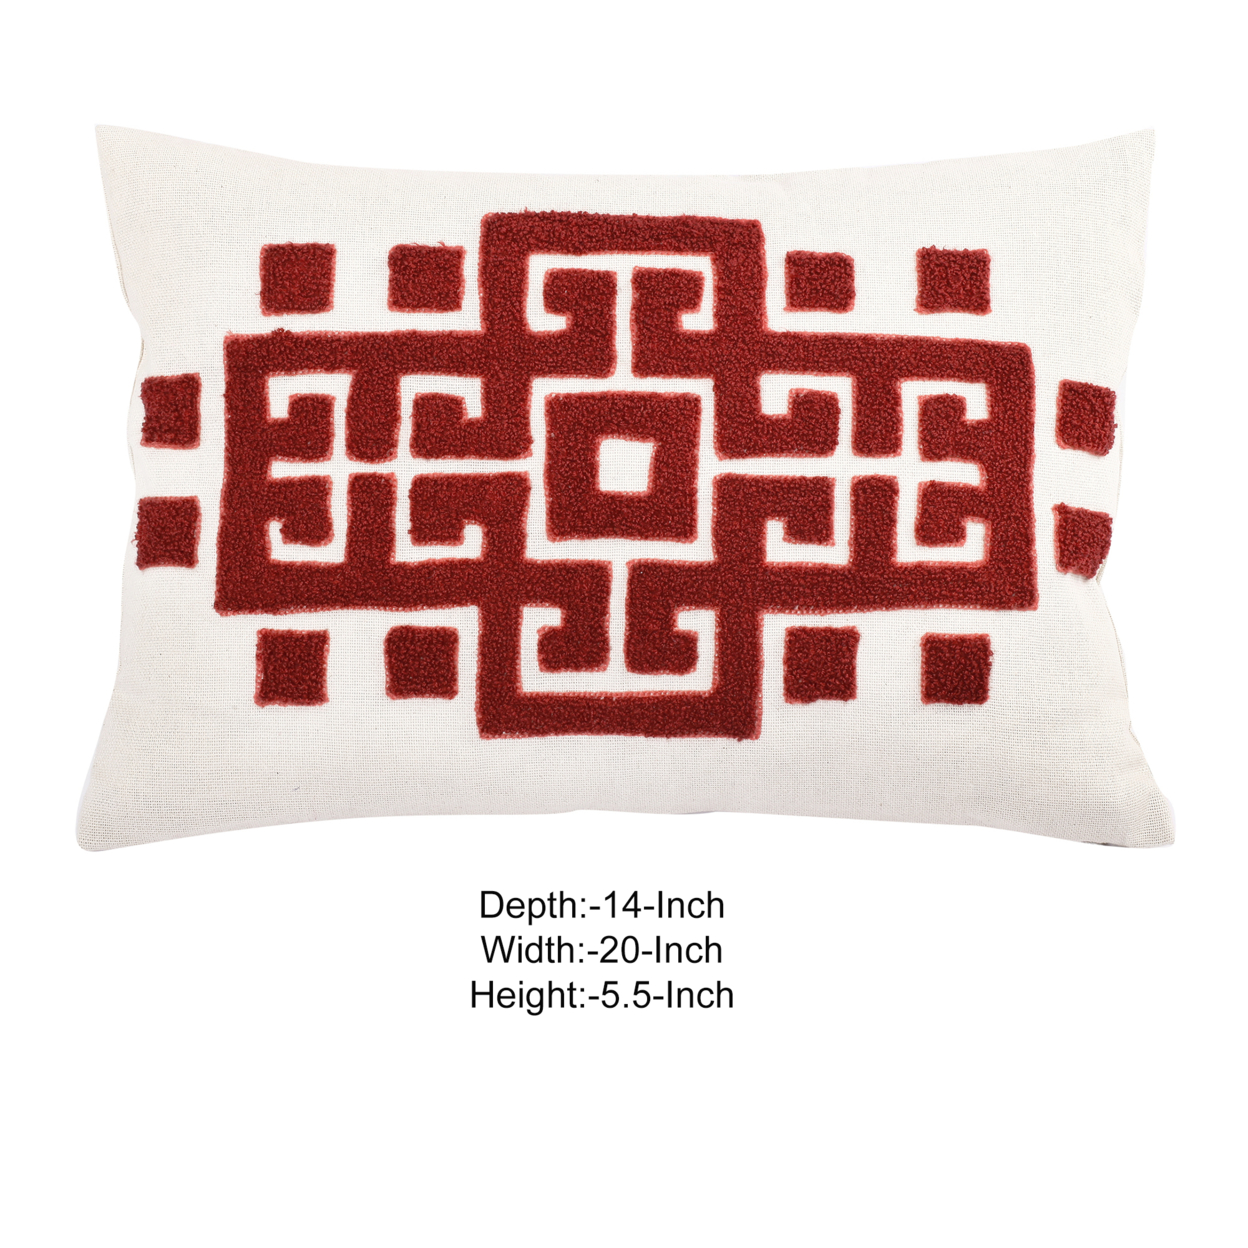 20 X 14 Inch Bergamo Embroidered Feather Filled Pillow, Set Of 2, White And Red- Saltoro Sherpi